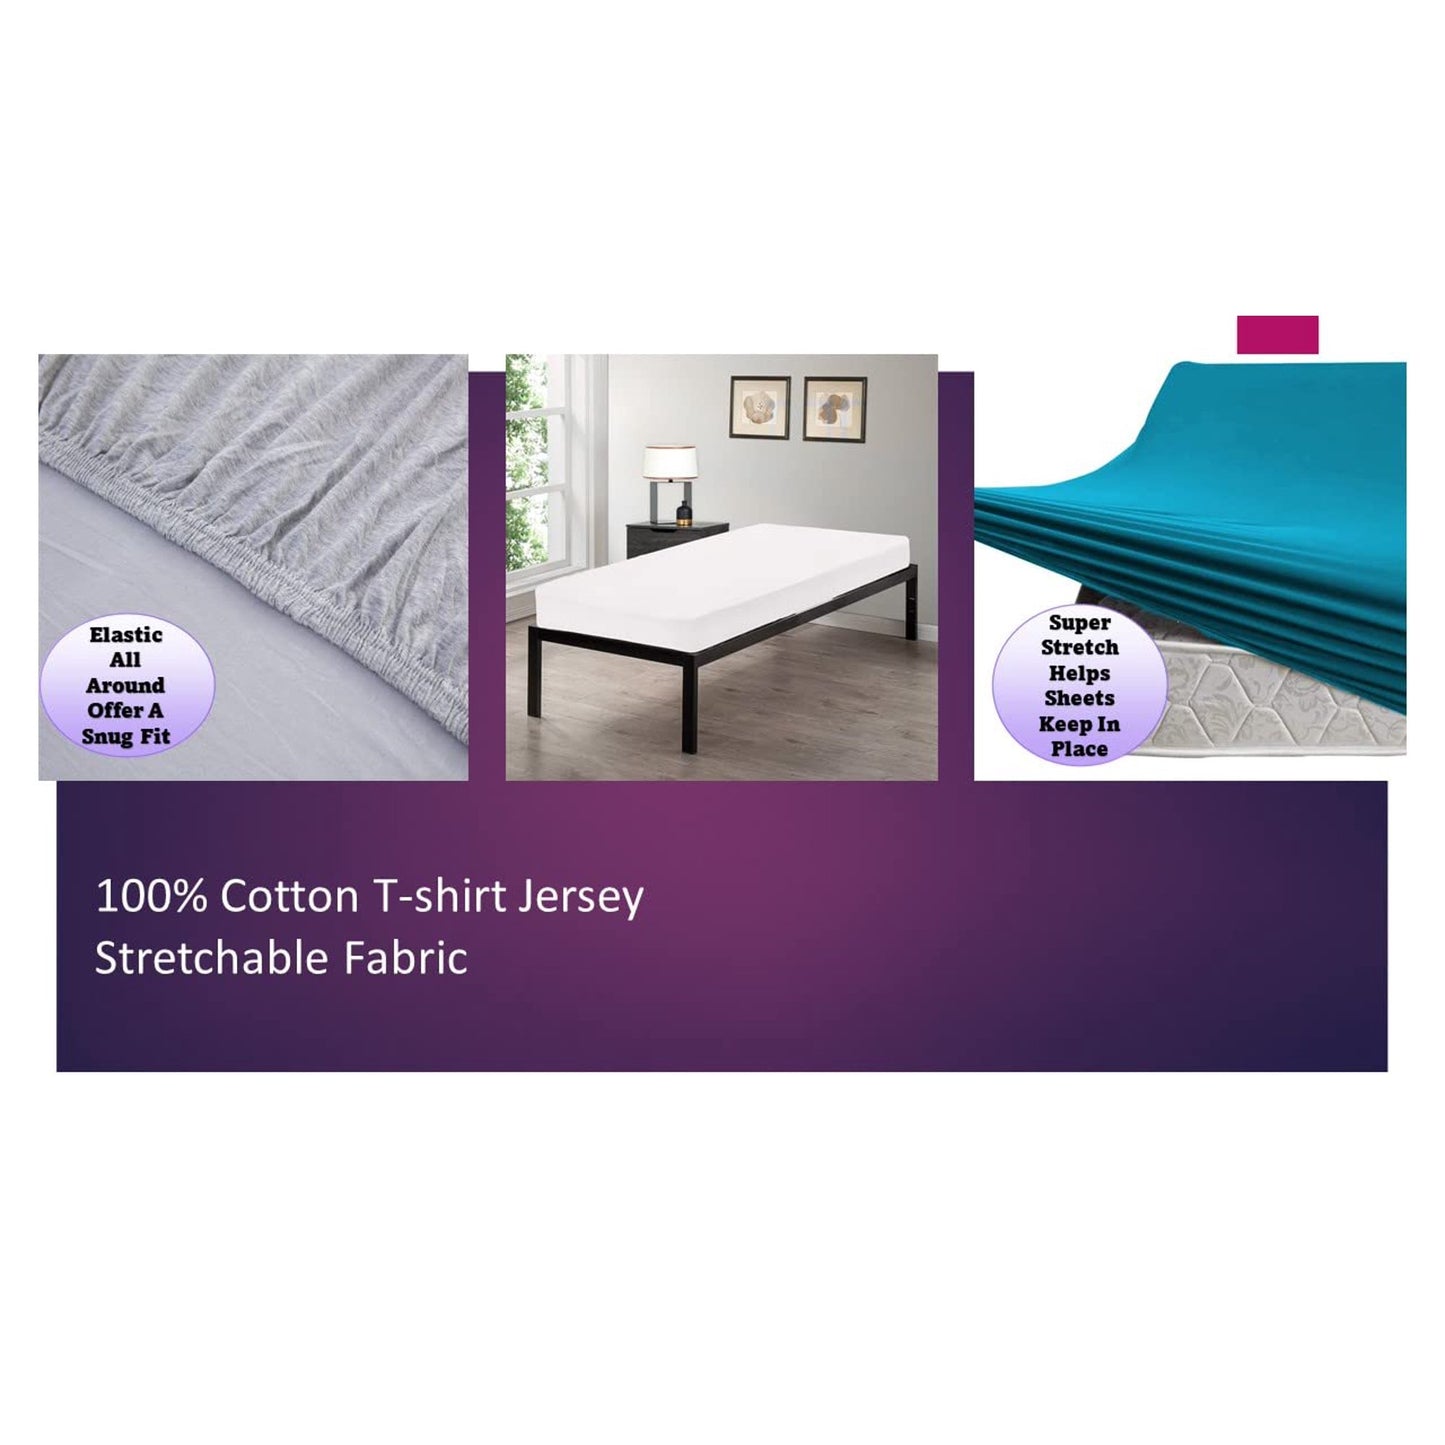 100% Combed T-Shirt Cotton Jersey Knit Camp Sheet Set, 1 Fitted cot Sheet, 1 Flat Sheet, 1 Standard Pillow case Marble Purple (Cot)